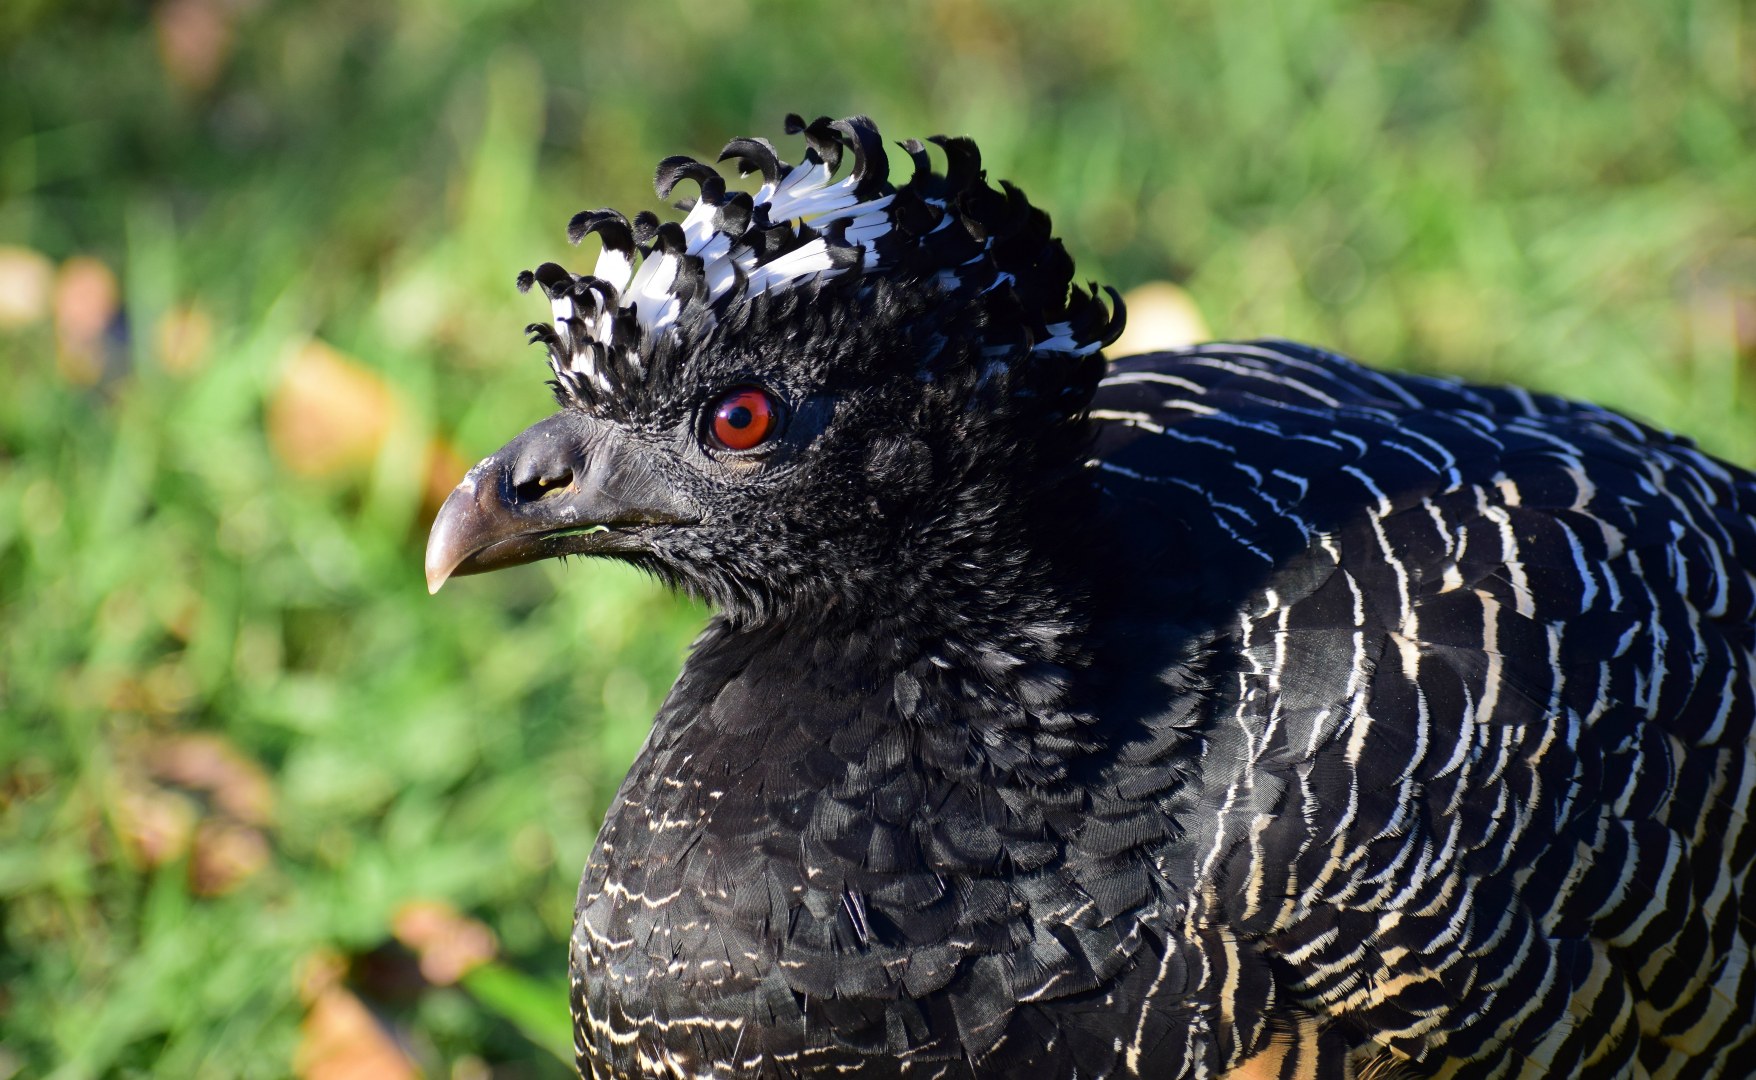 Bare-faced Curassow, Central Pantanal